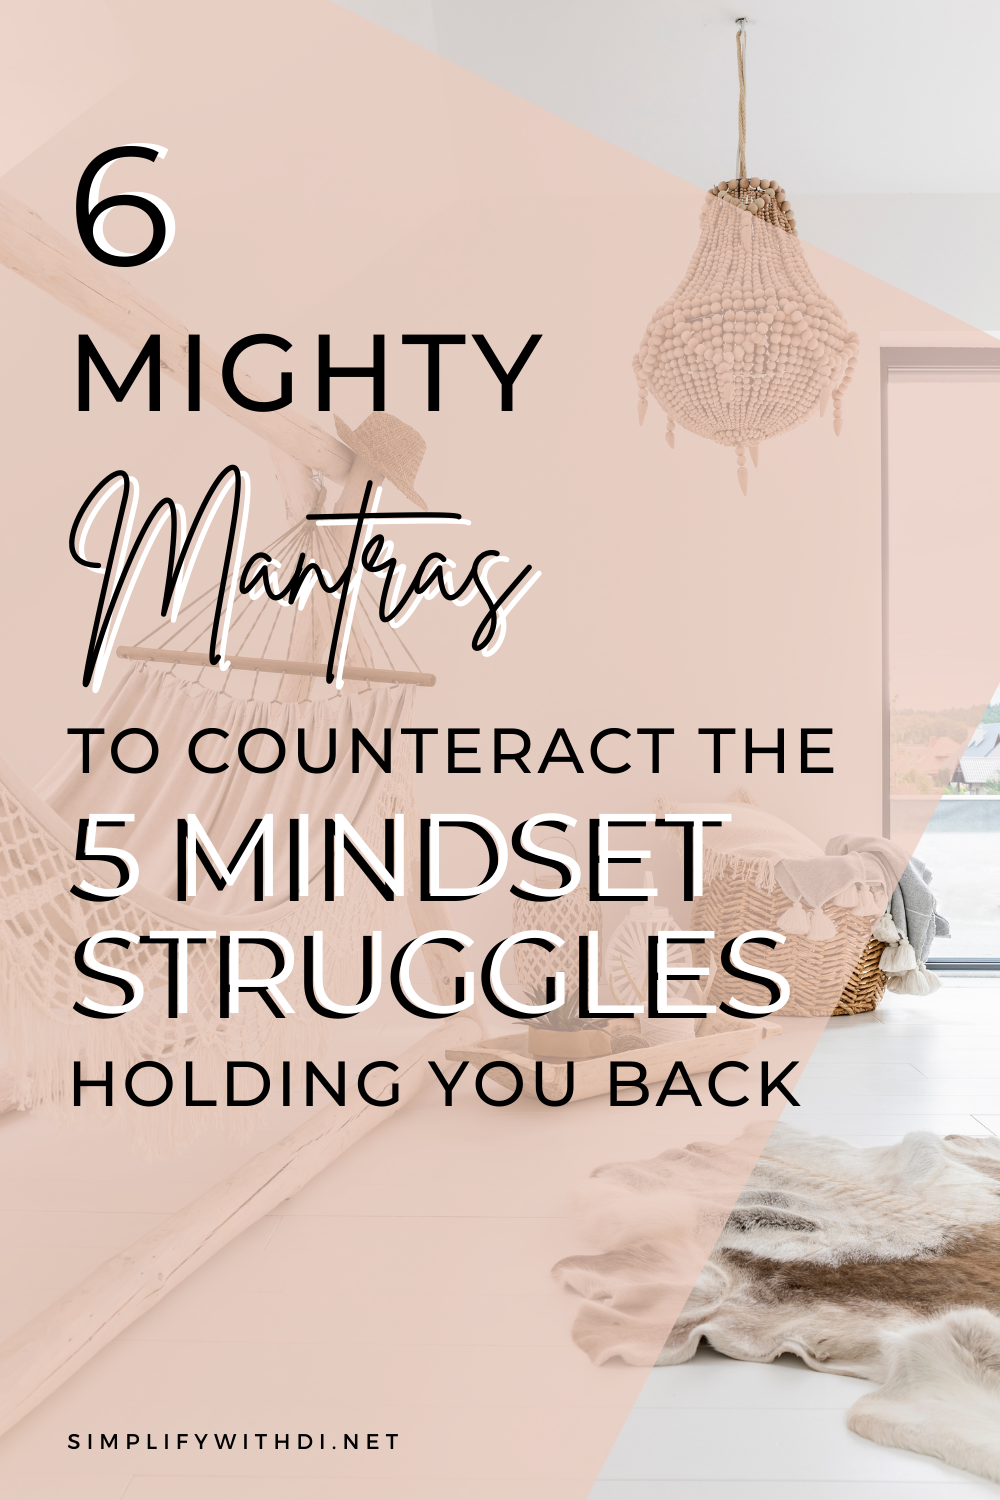 An easy guide to changing your mindset with hacks that will change your life - including mantras and affirmations to attract wealth, prosperity and abundance. This guide will help you create habits to say goodbye to your scarcity mindset. Whether you need an abundance of money, success, love or relationships, these positive exercises will help you create a routine which you find your life overflowing, filling you with gratitude.